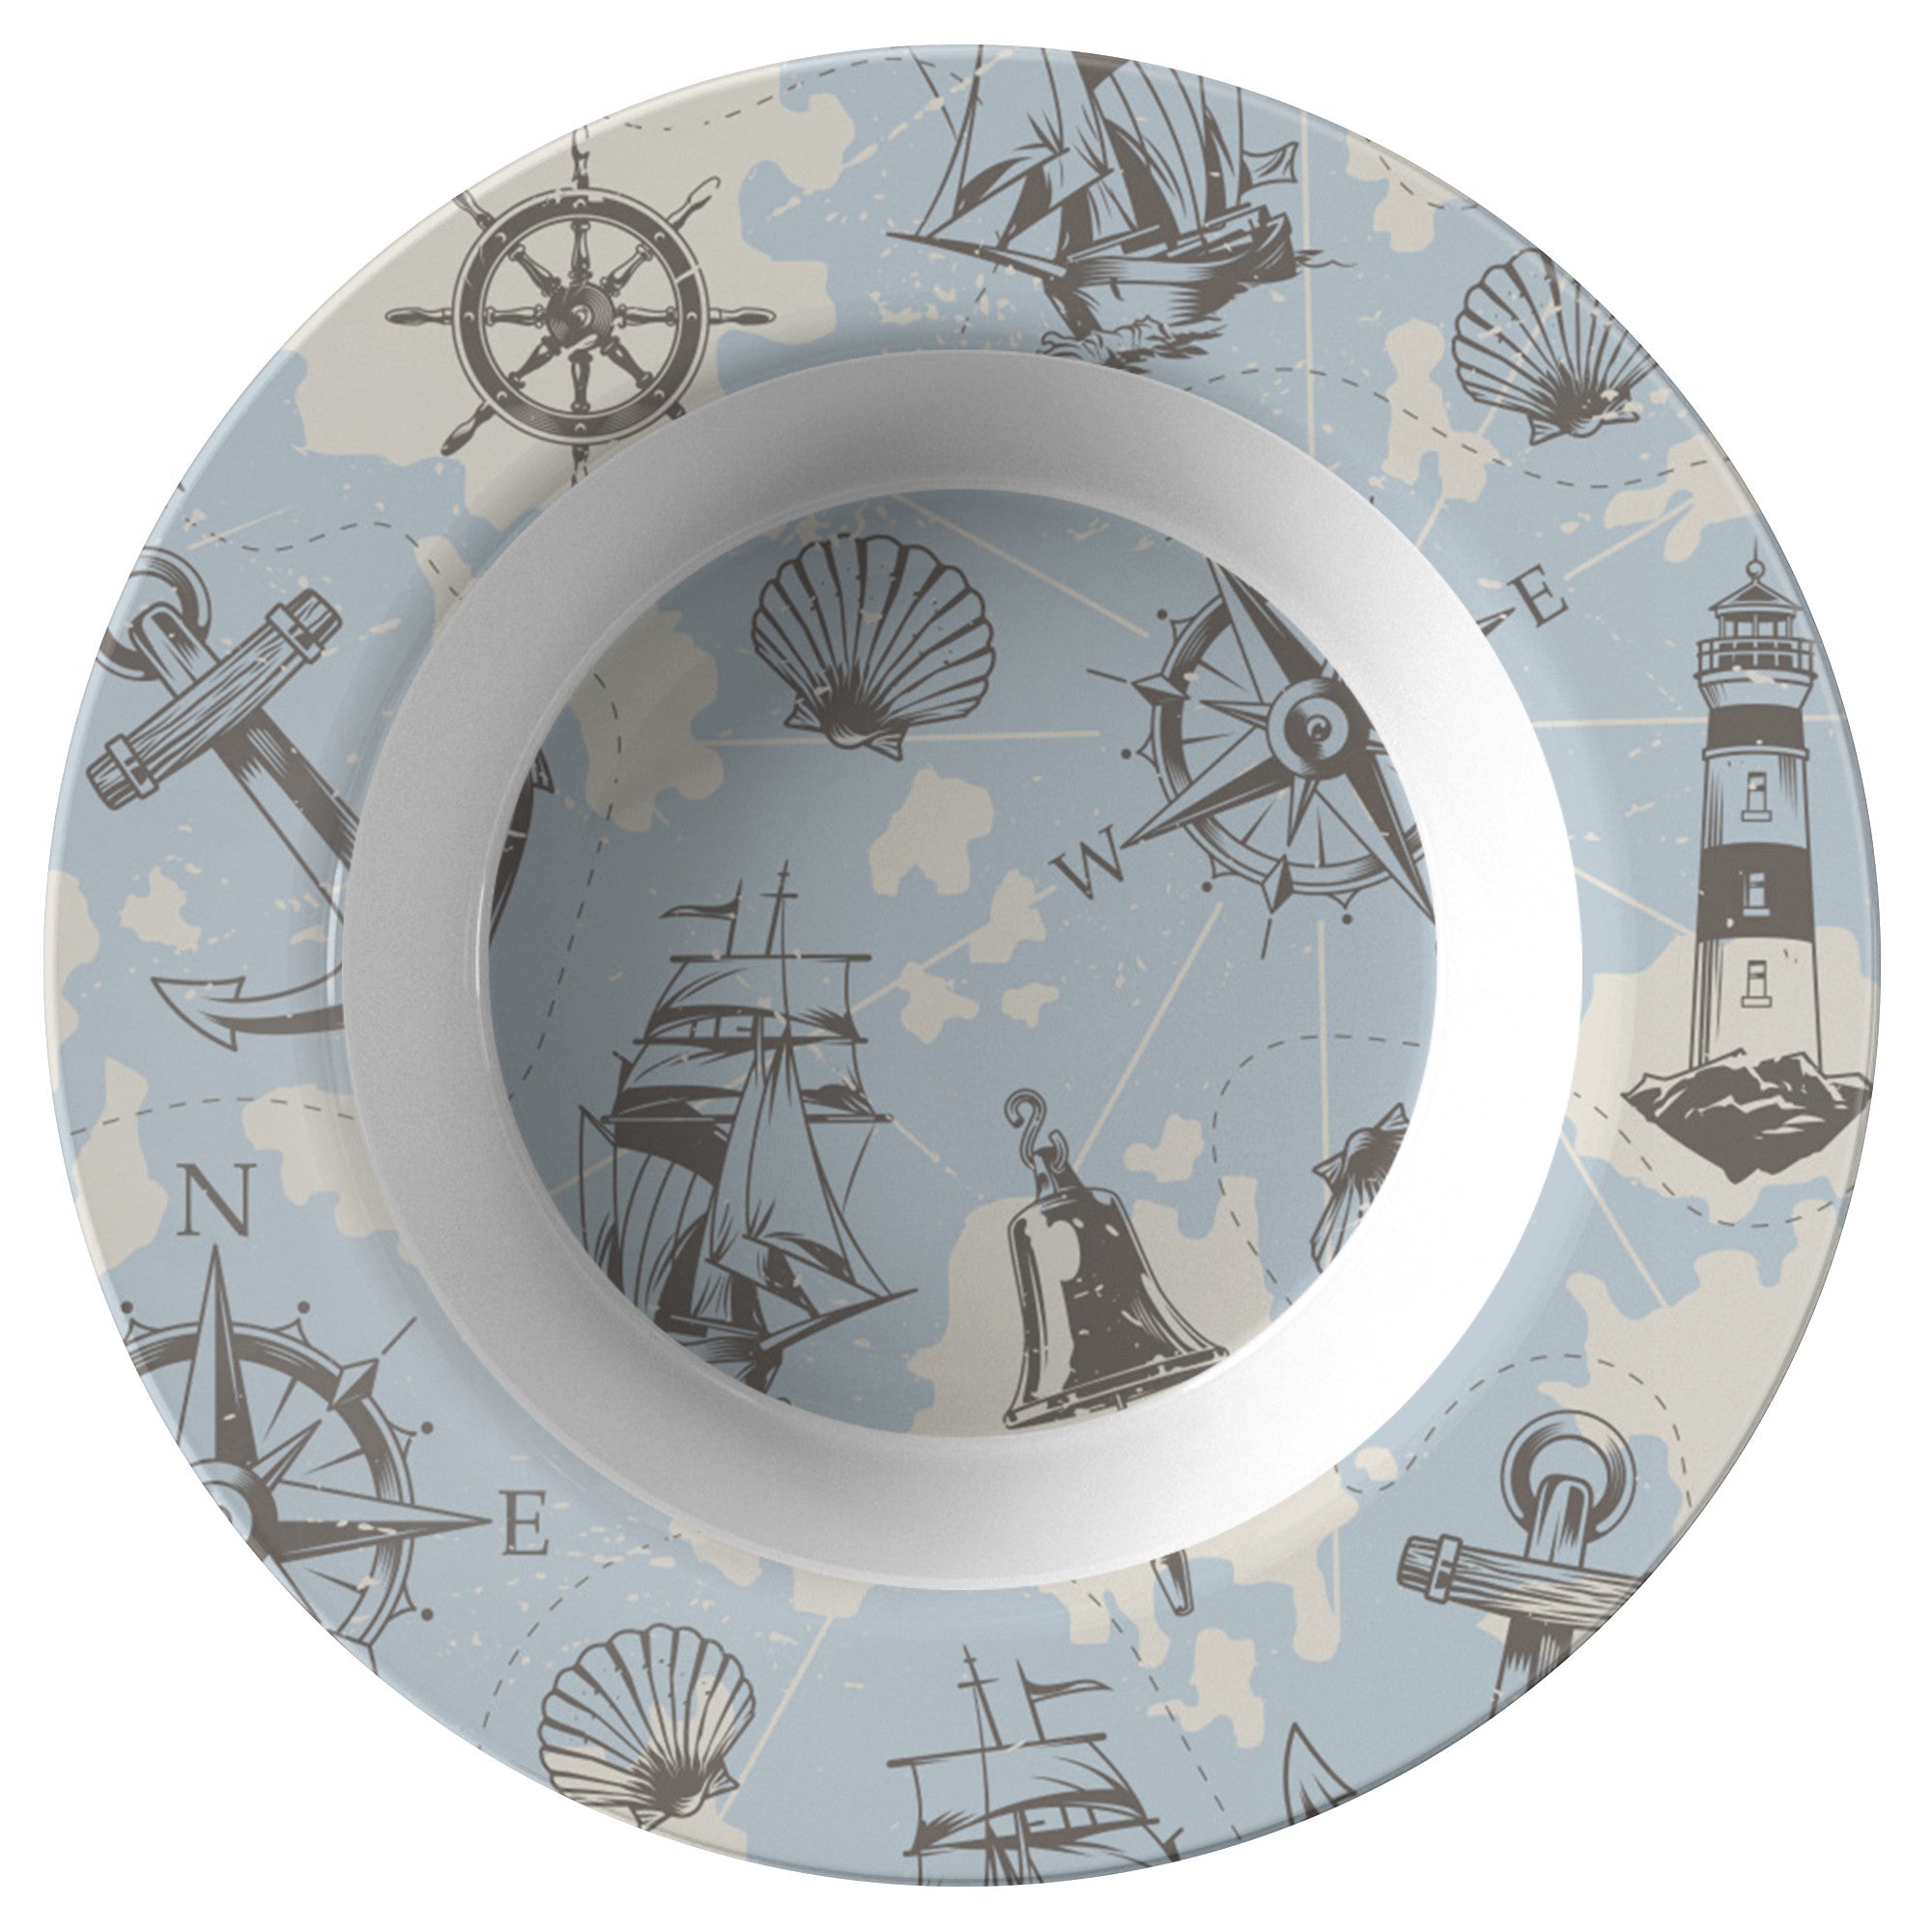 Printed Polymer Soup Bowl - The Navigator in Sand & Sky